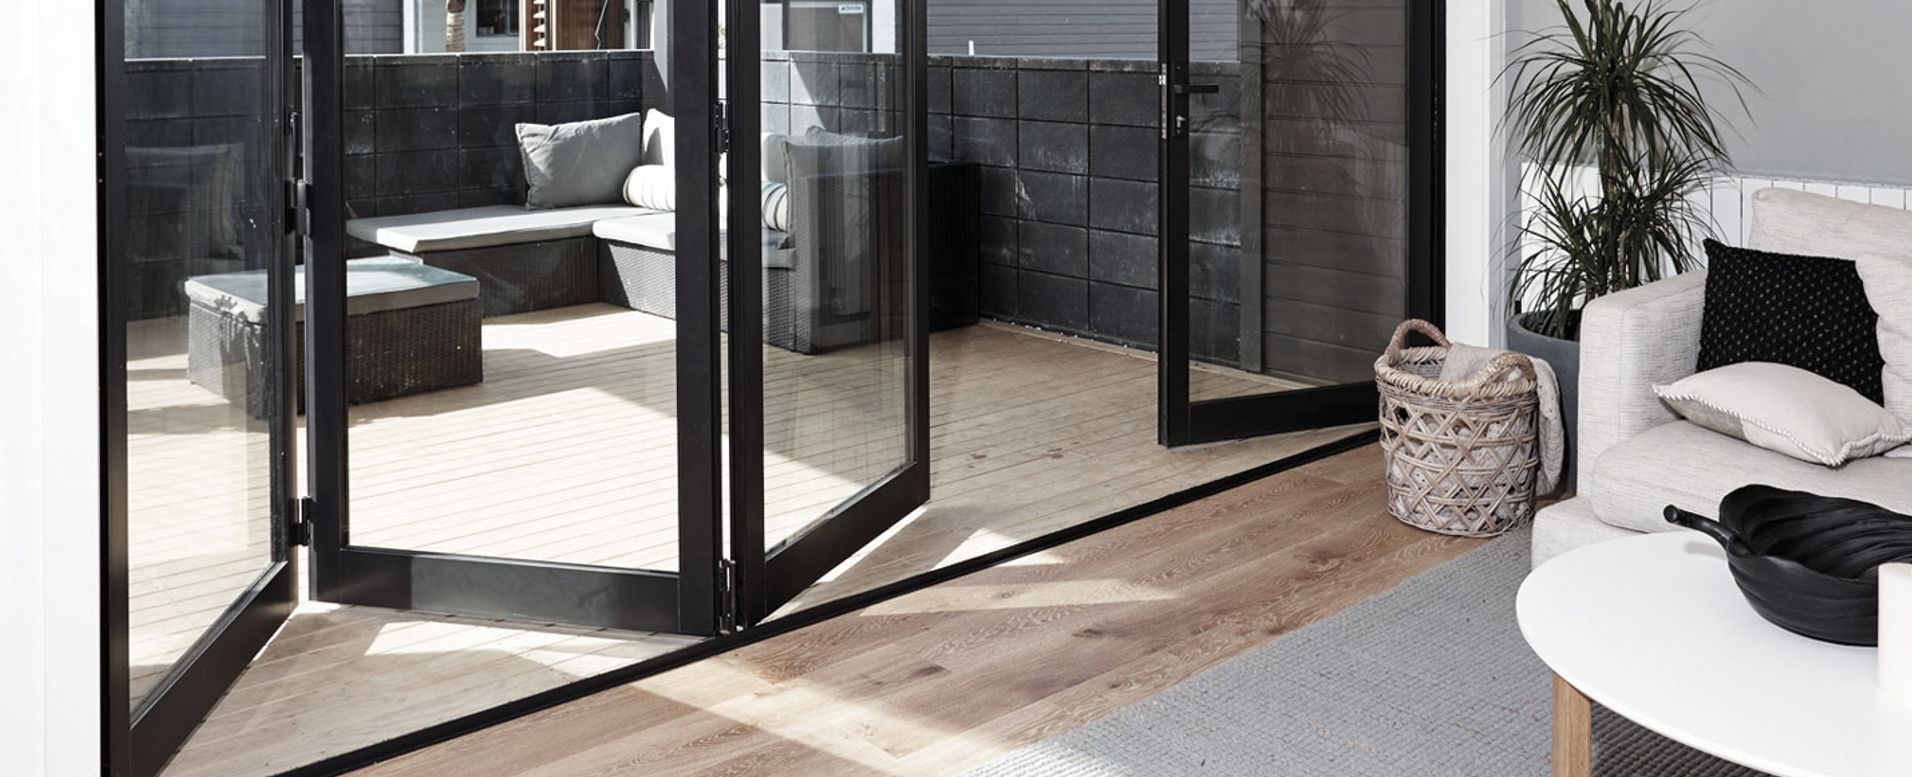 Fisher™ Windows and Doors Banner image